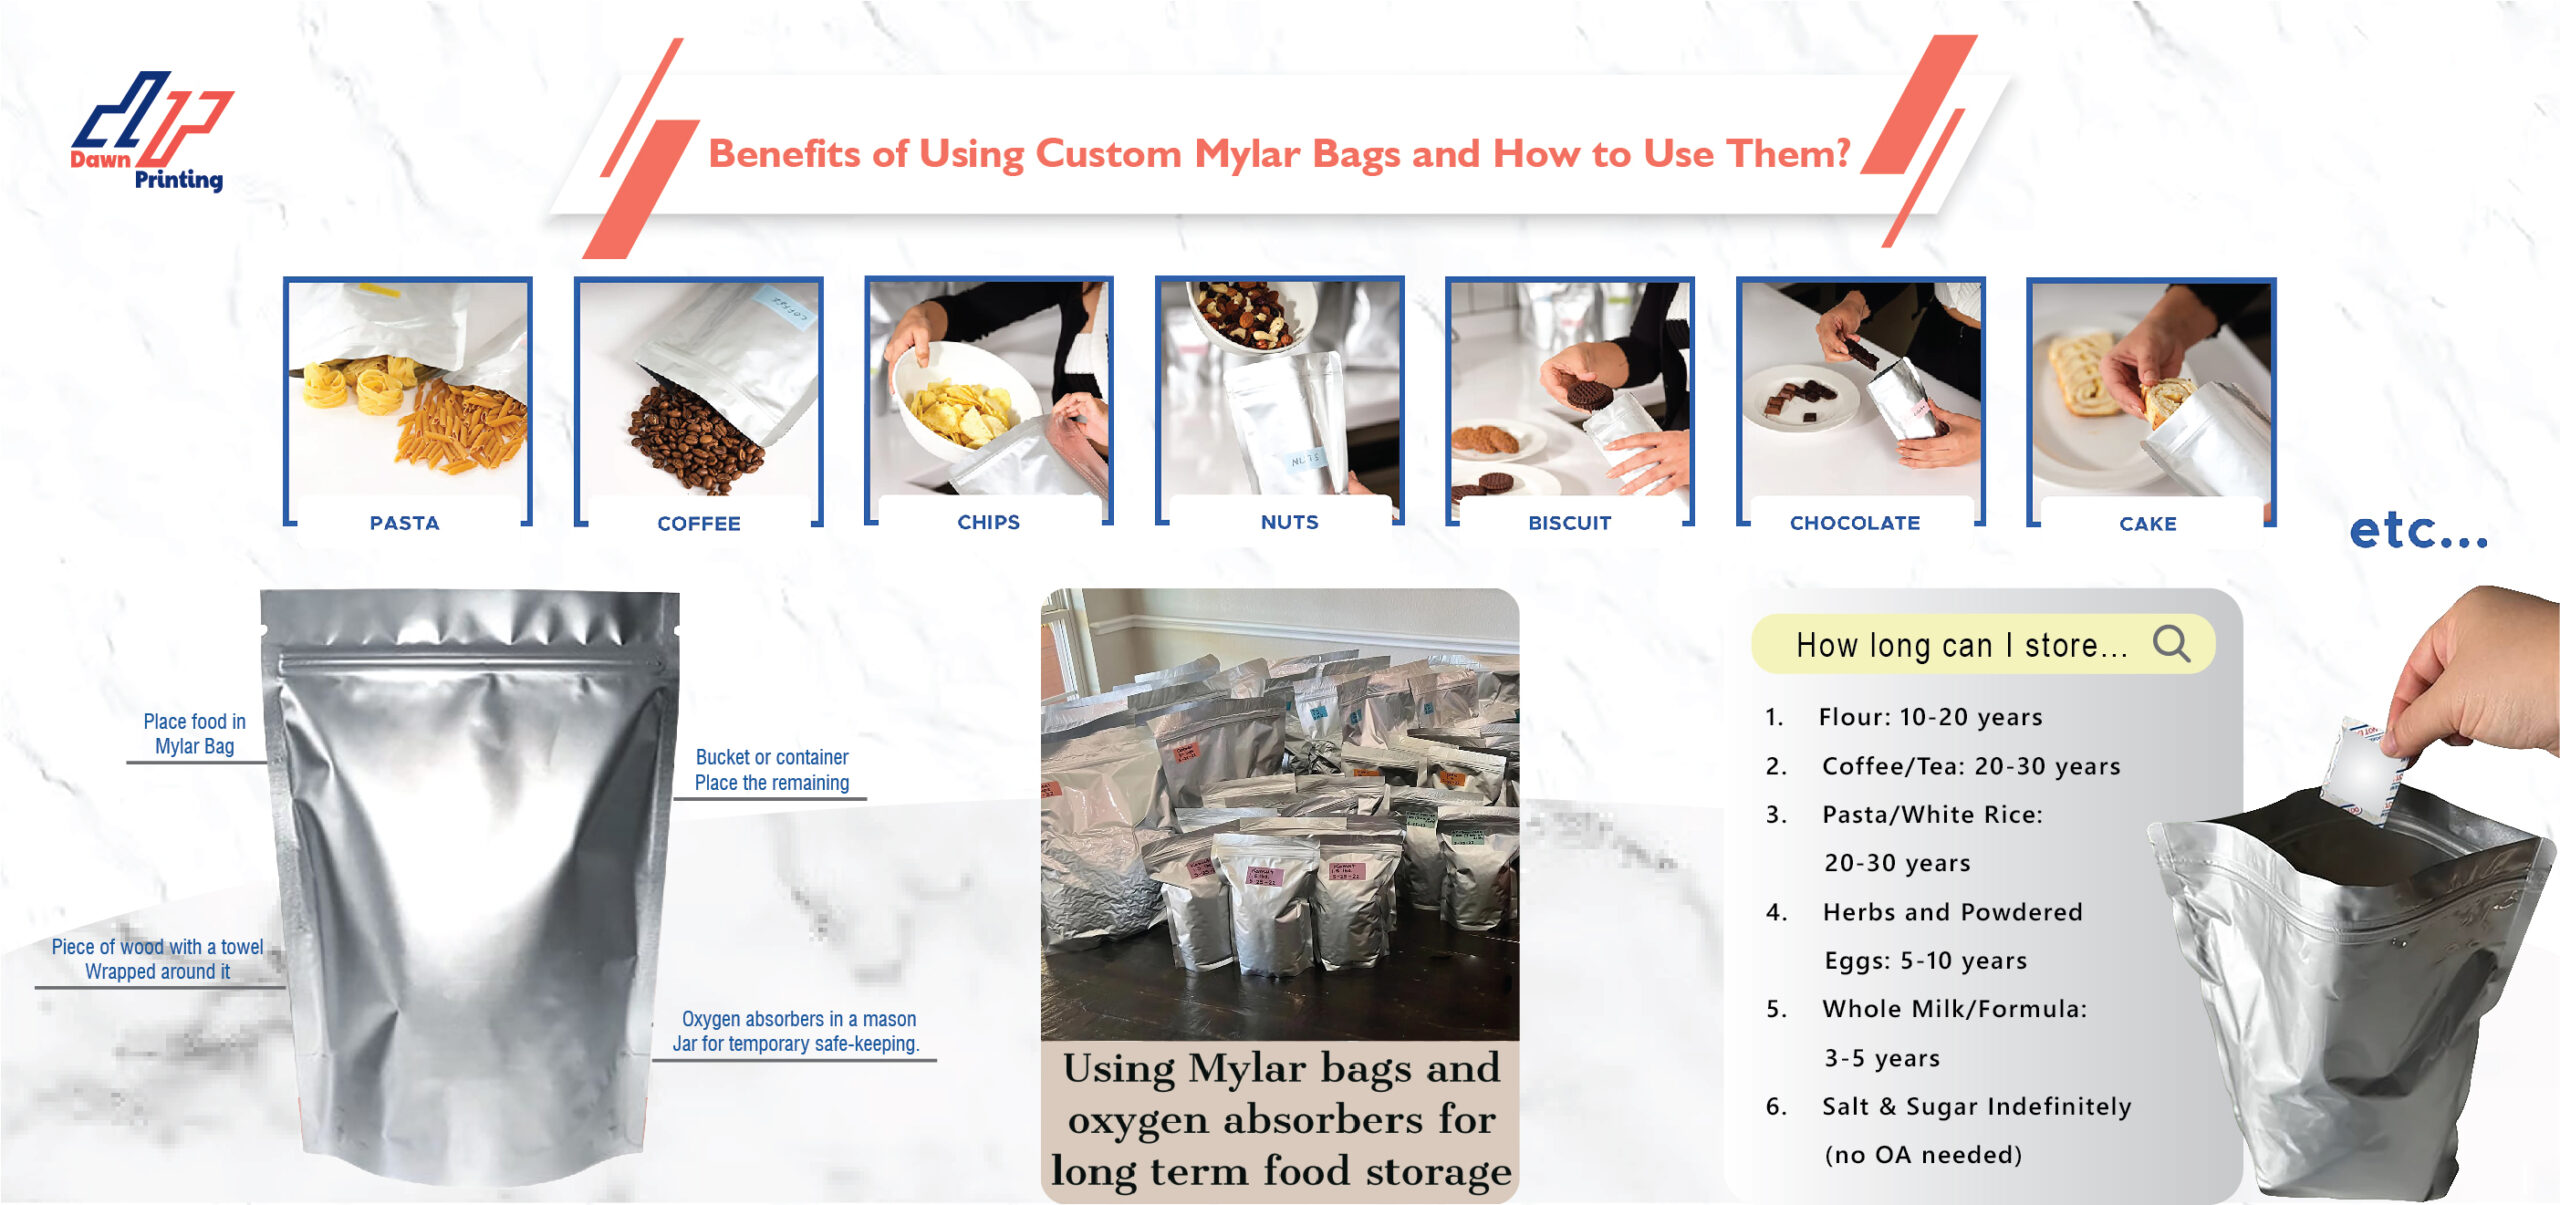 Benefits of Using Custom Mylar Bags and How to Use Them-Dawn Printing